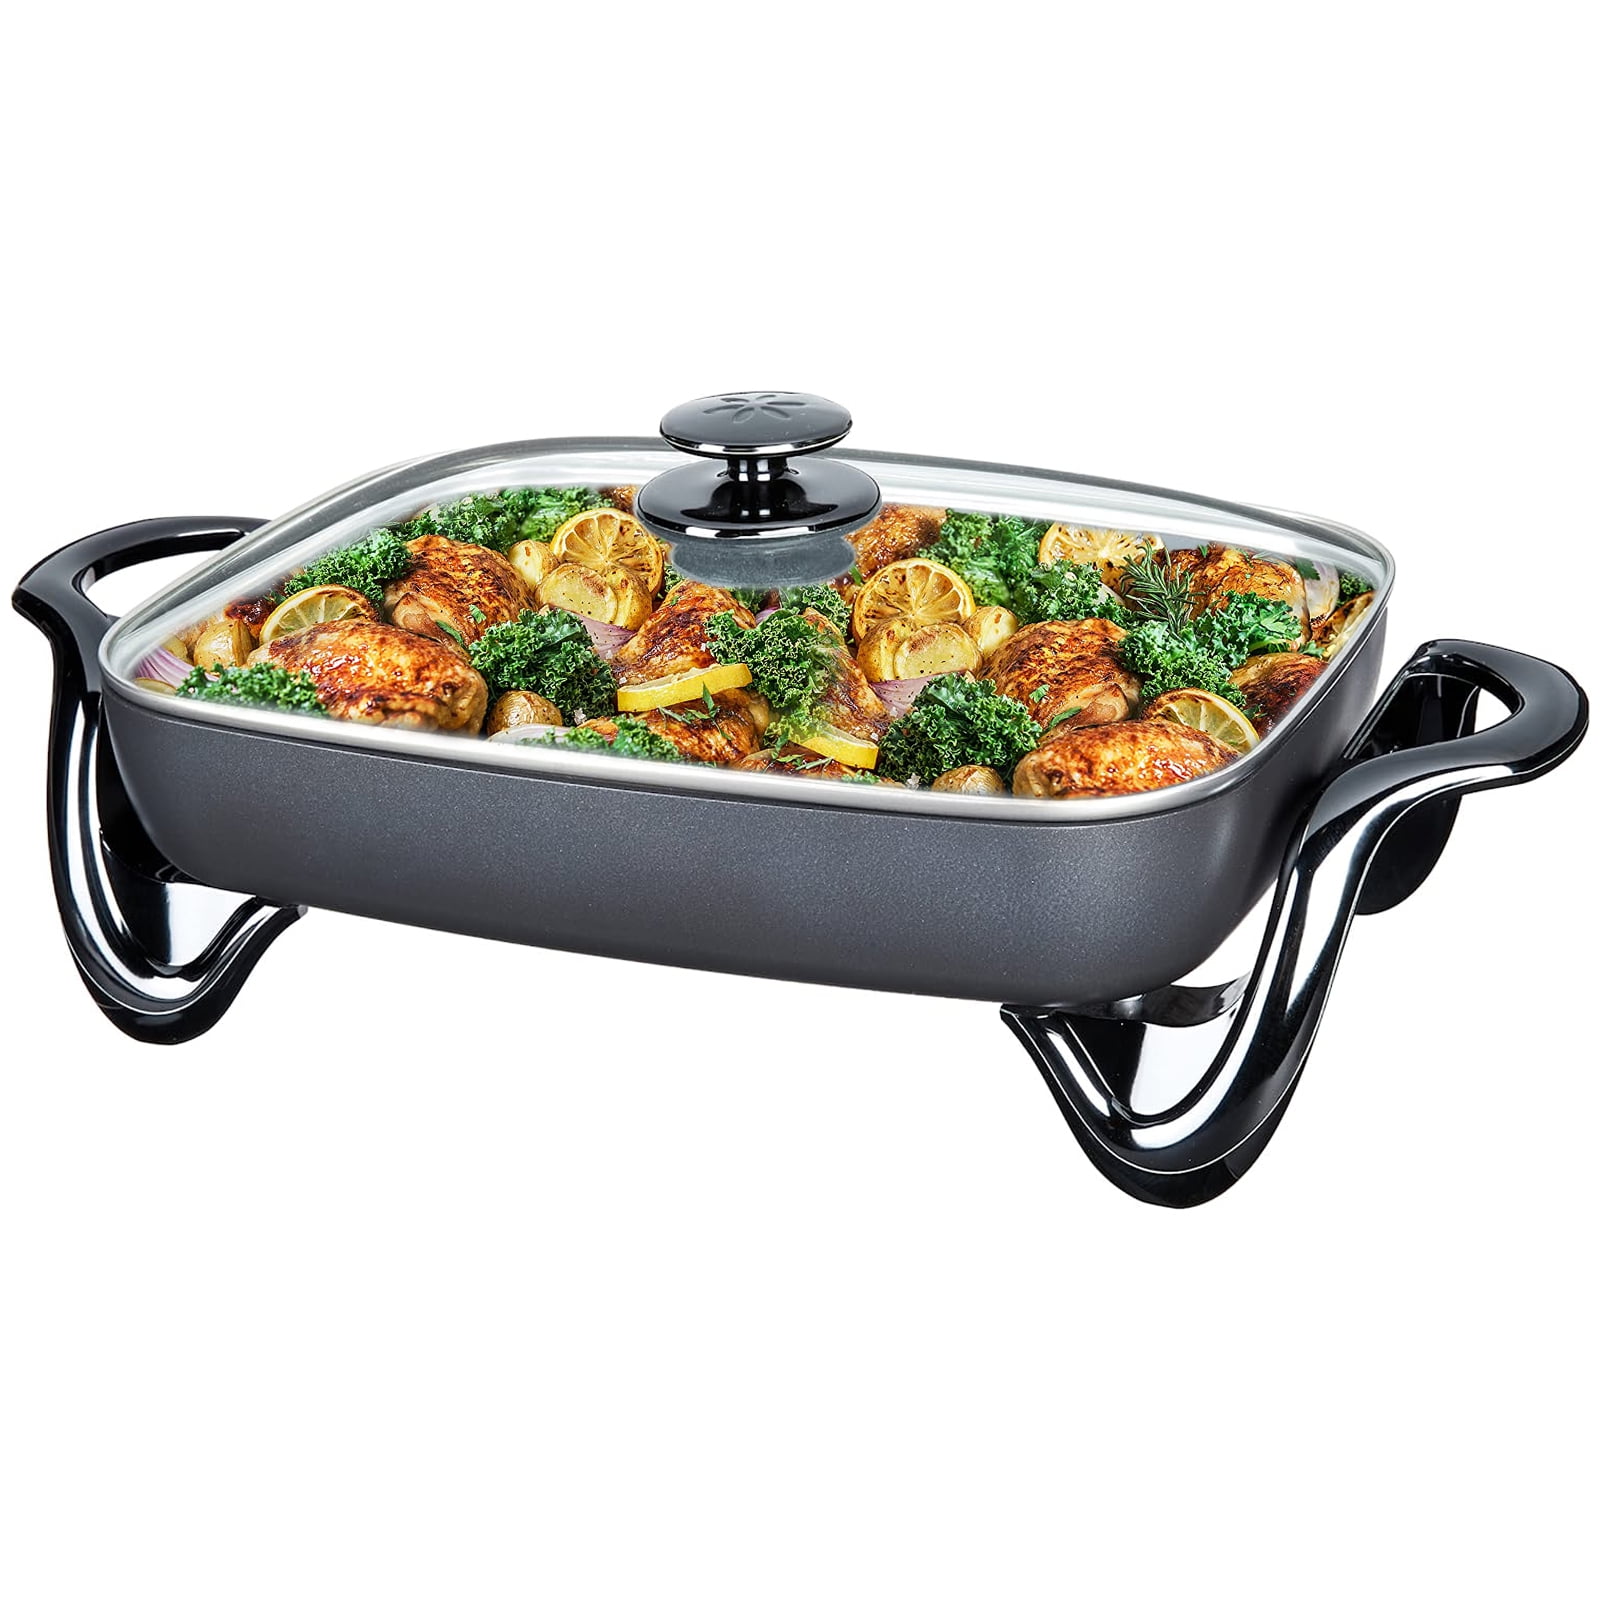  Electric Skillets Nonstick 16-Inch Extra-Large with Lids - Deep  Electric Frying Pan, Adjustable Temperature, for Roast Fry Grill Stew Bake  Make Casseroles and More, Black: Home & Kitchen